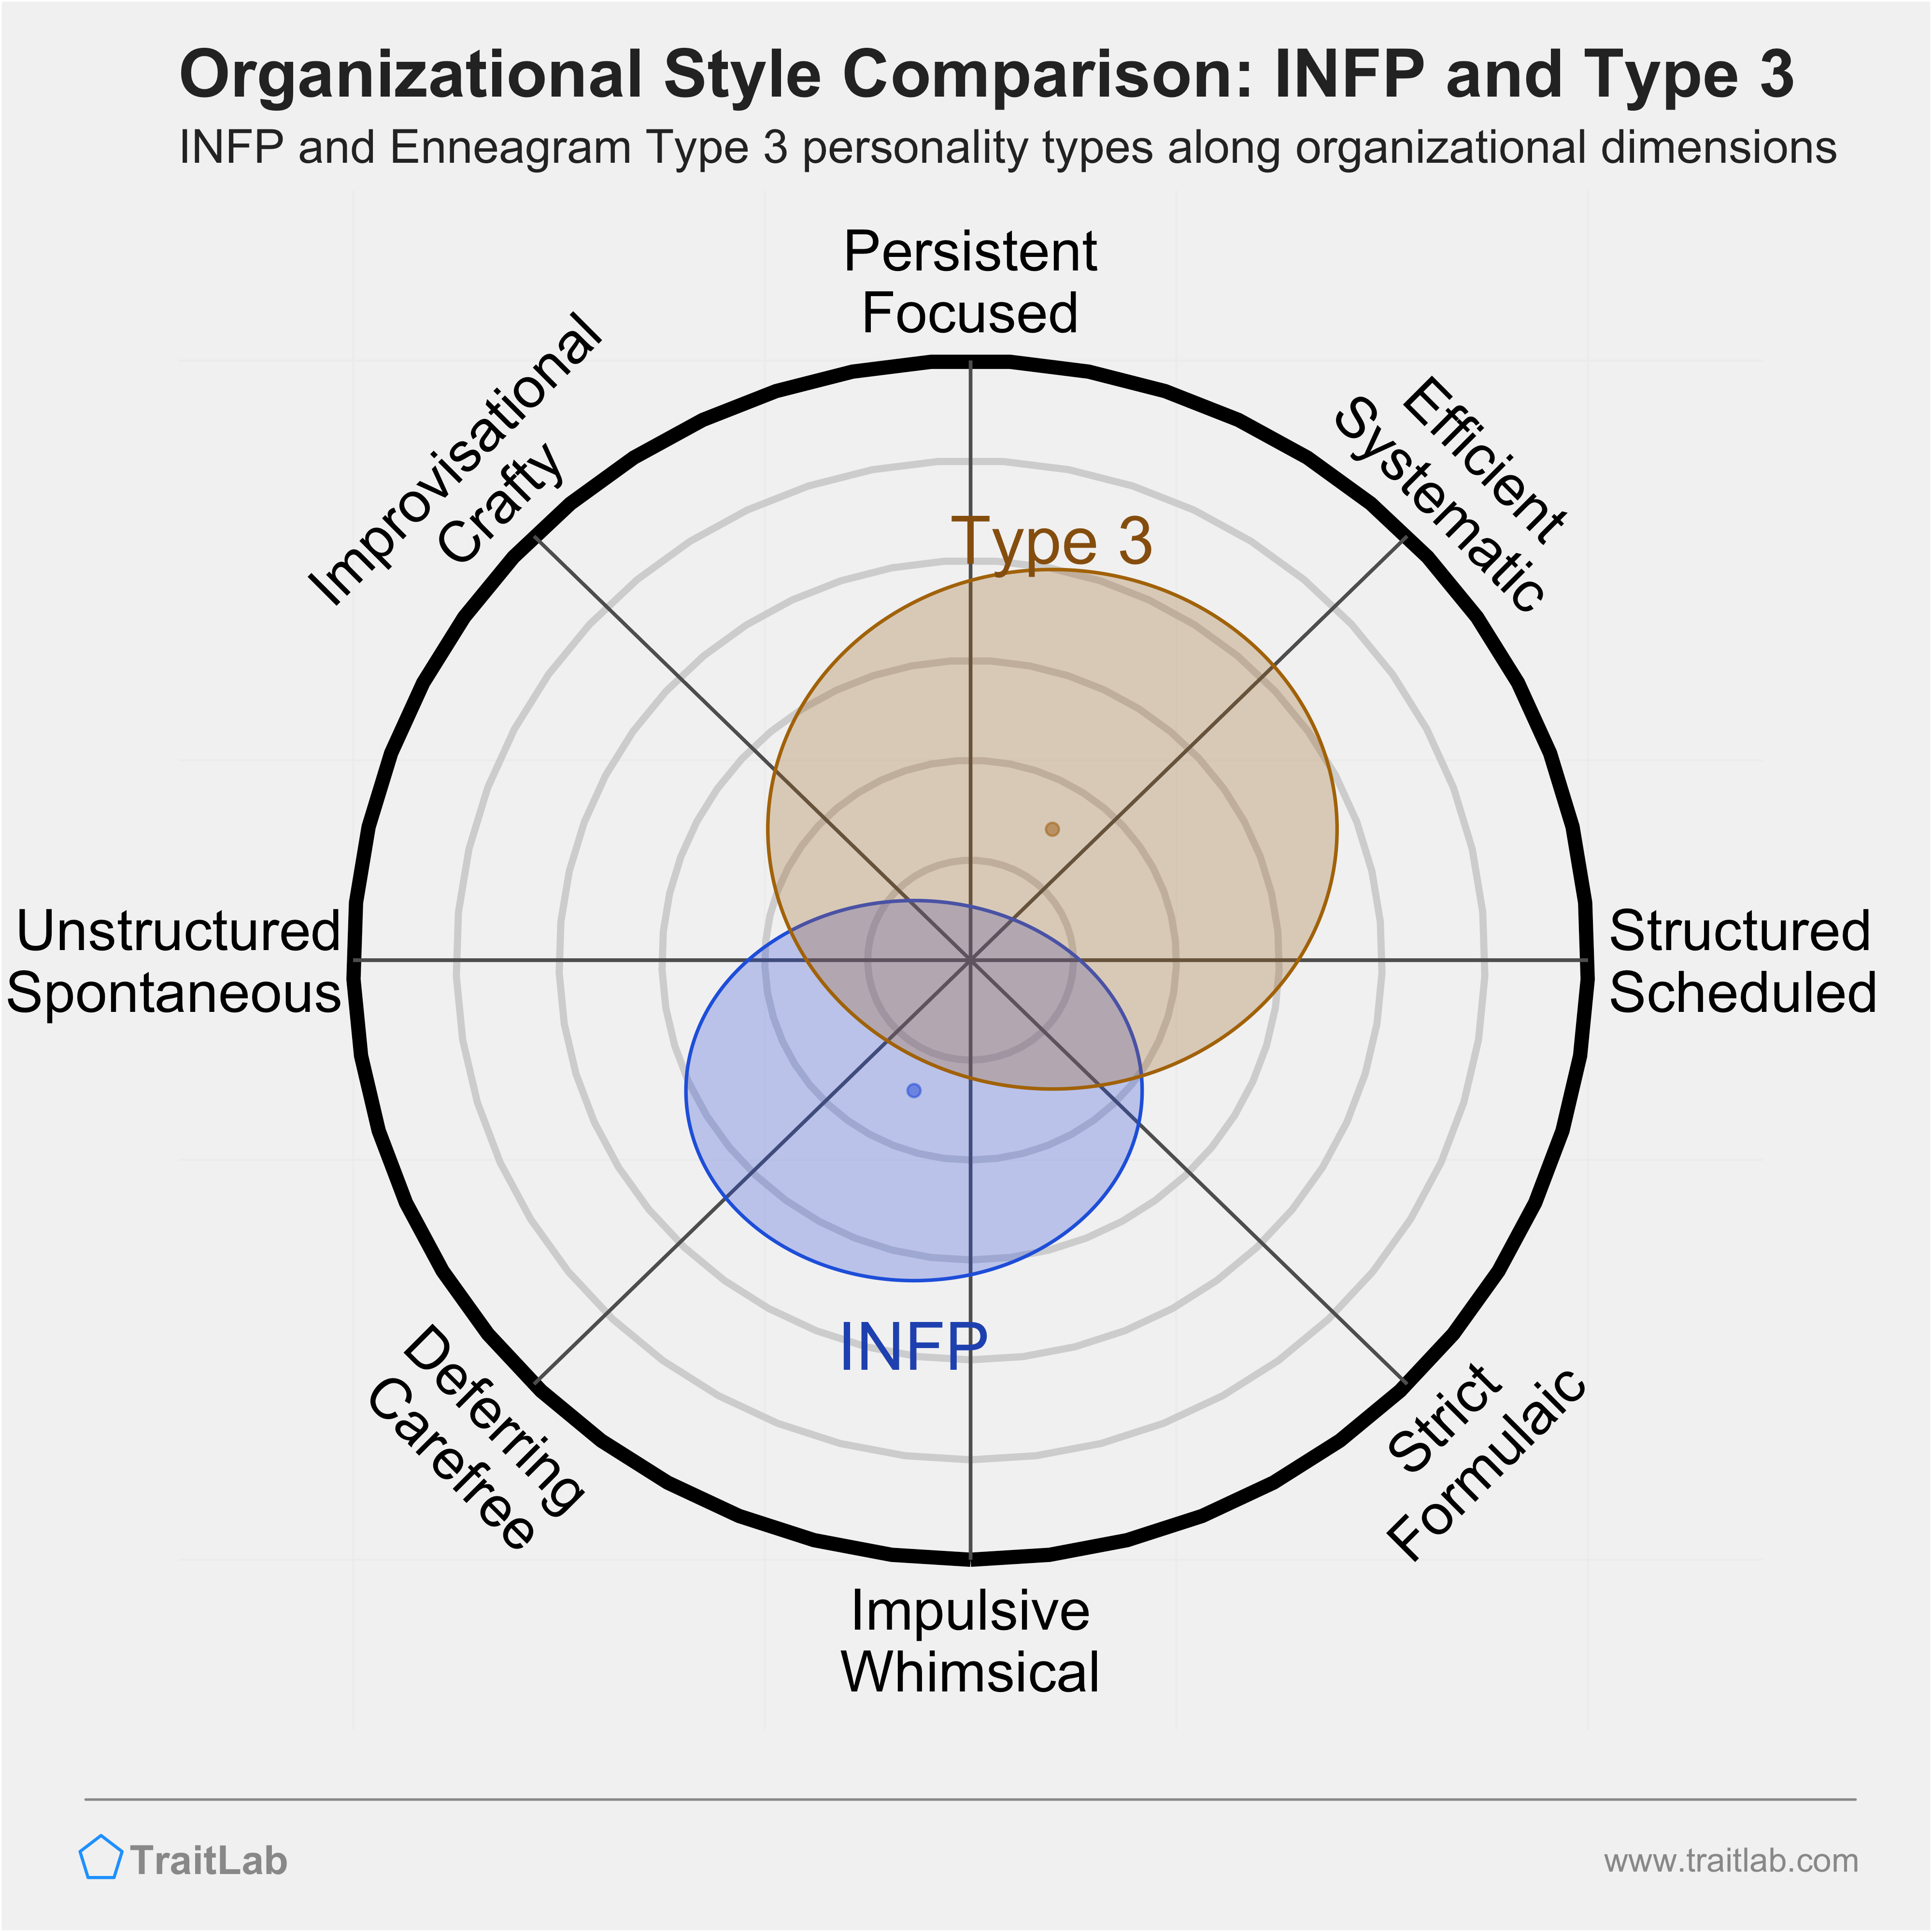 INFP and Type 3 comparison across organizational dimensions